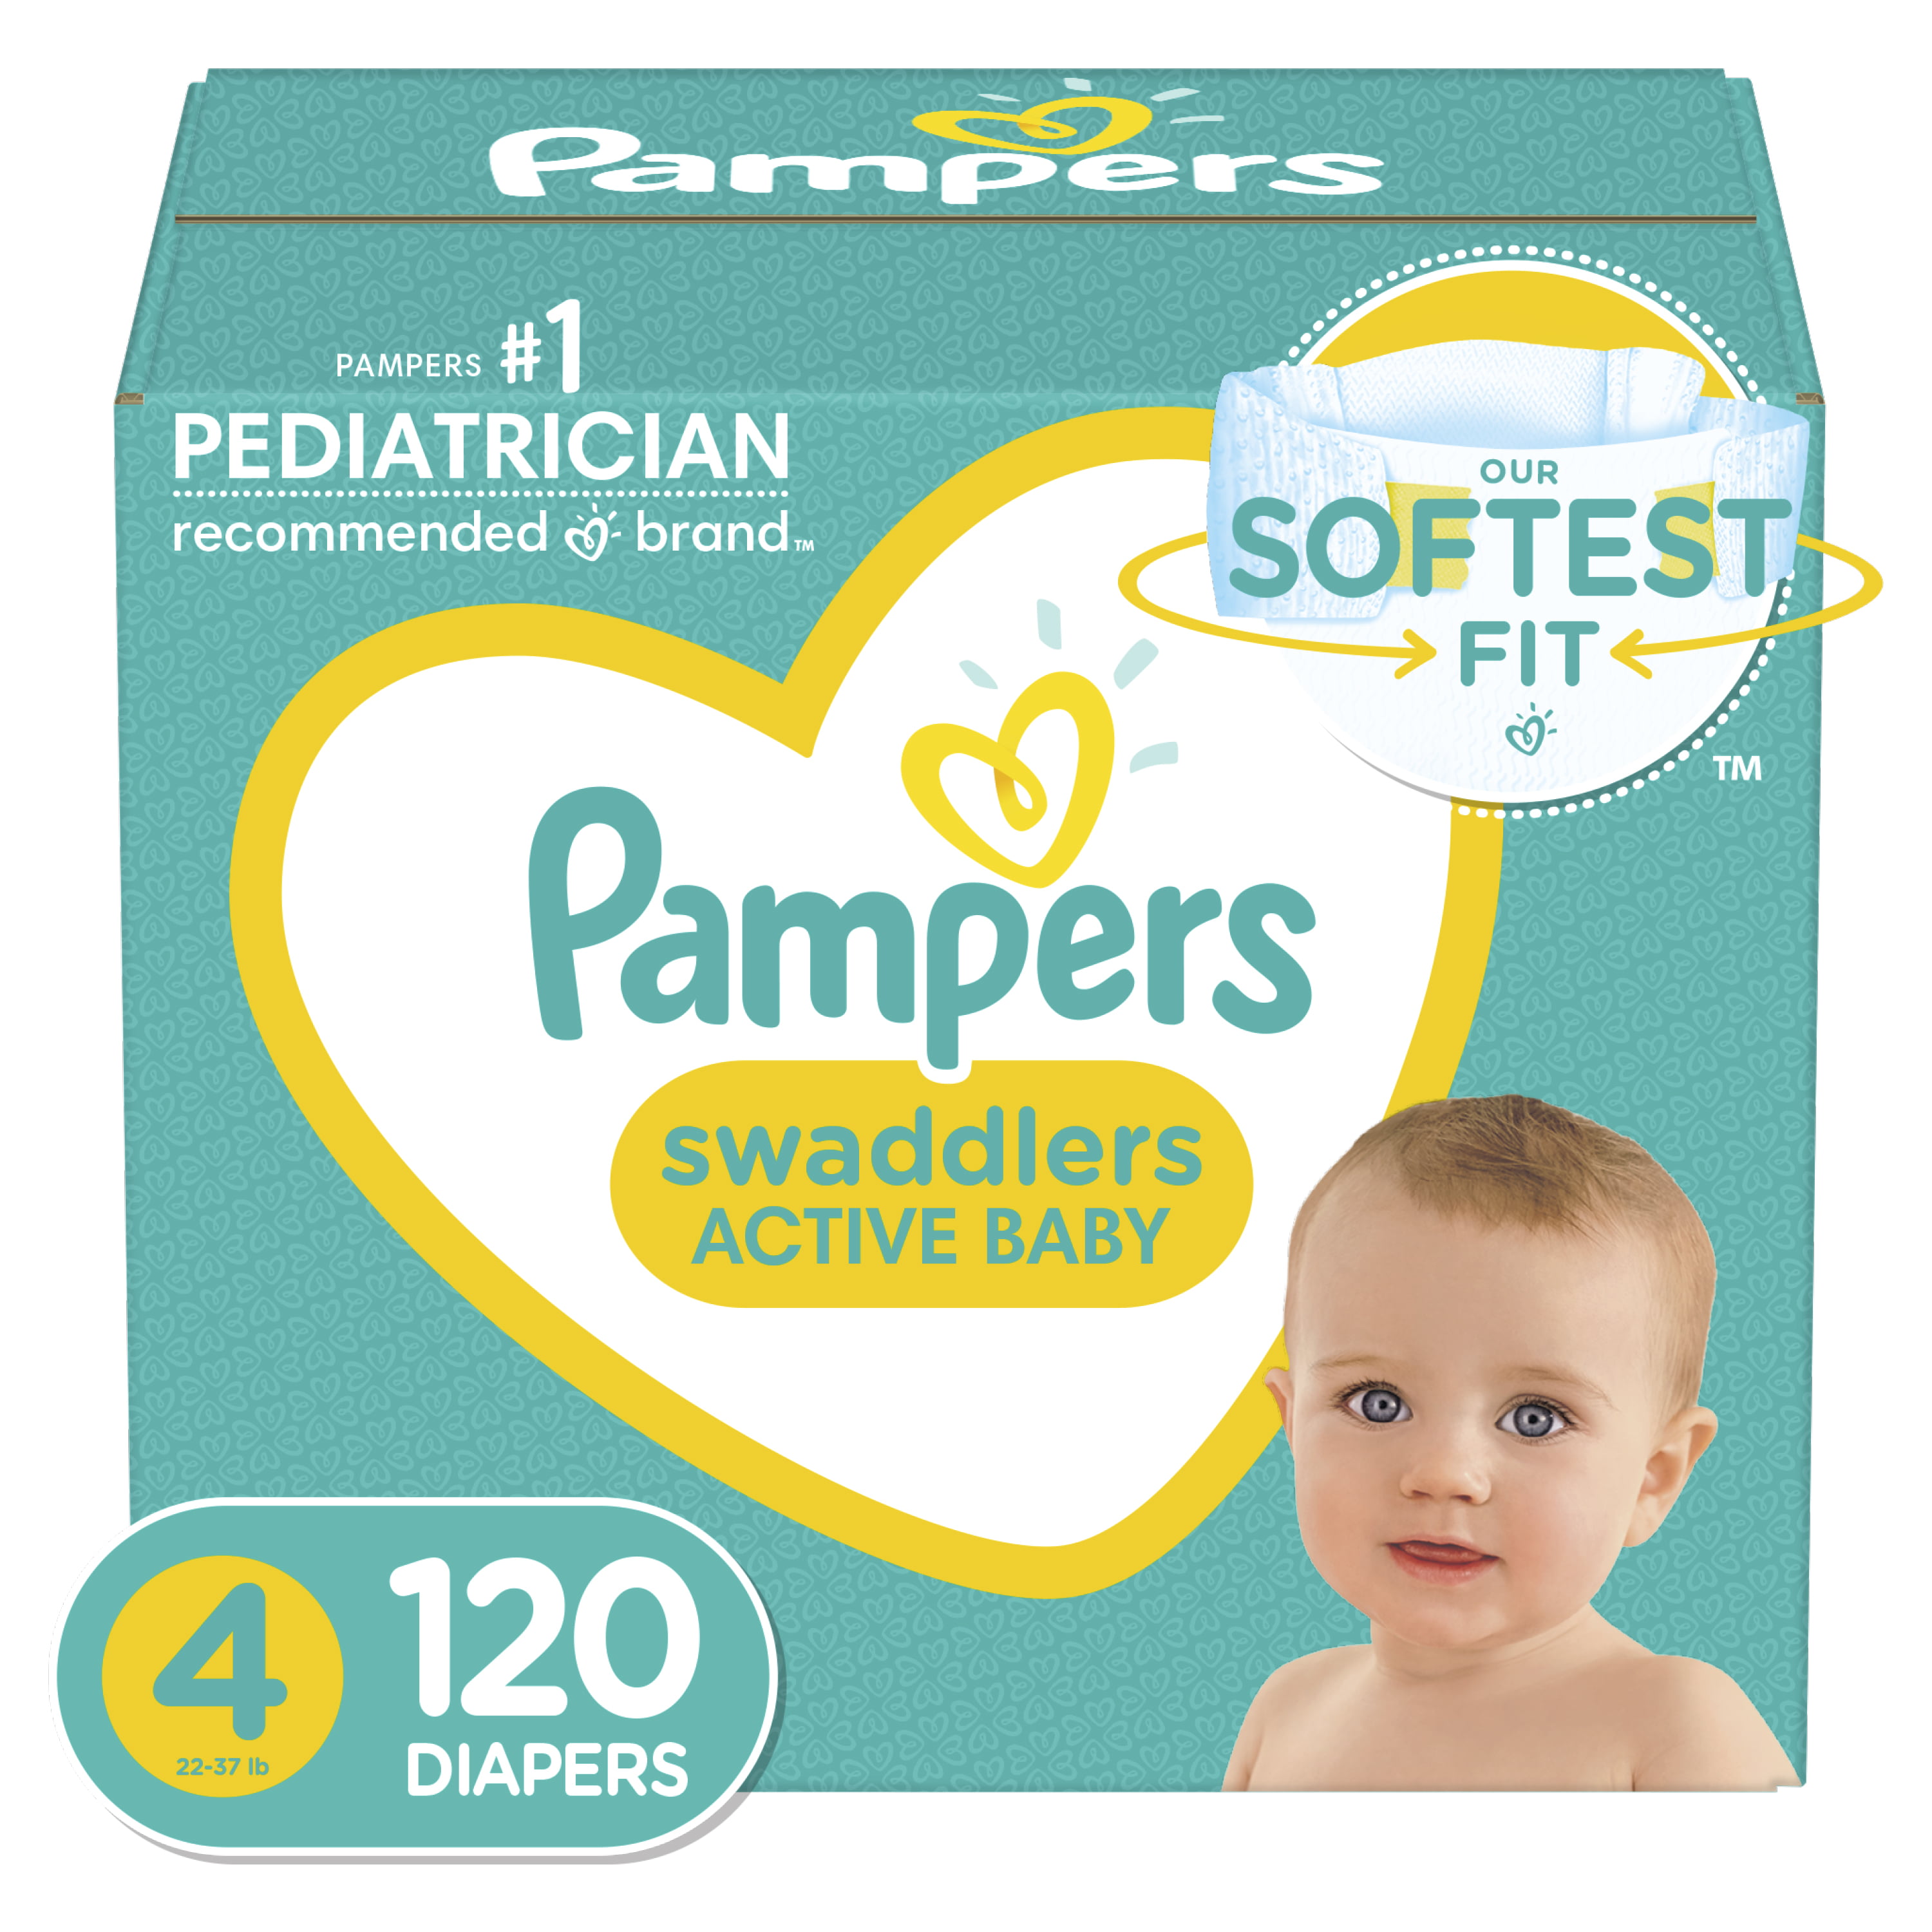 Economy Pack Plus Pampers Diapers Size 4 Swaddlers Disposable Baby Diapers 140 Count